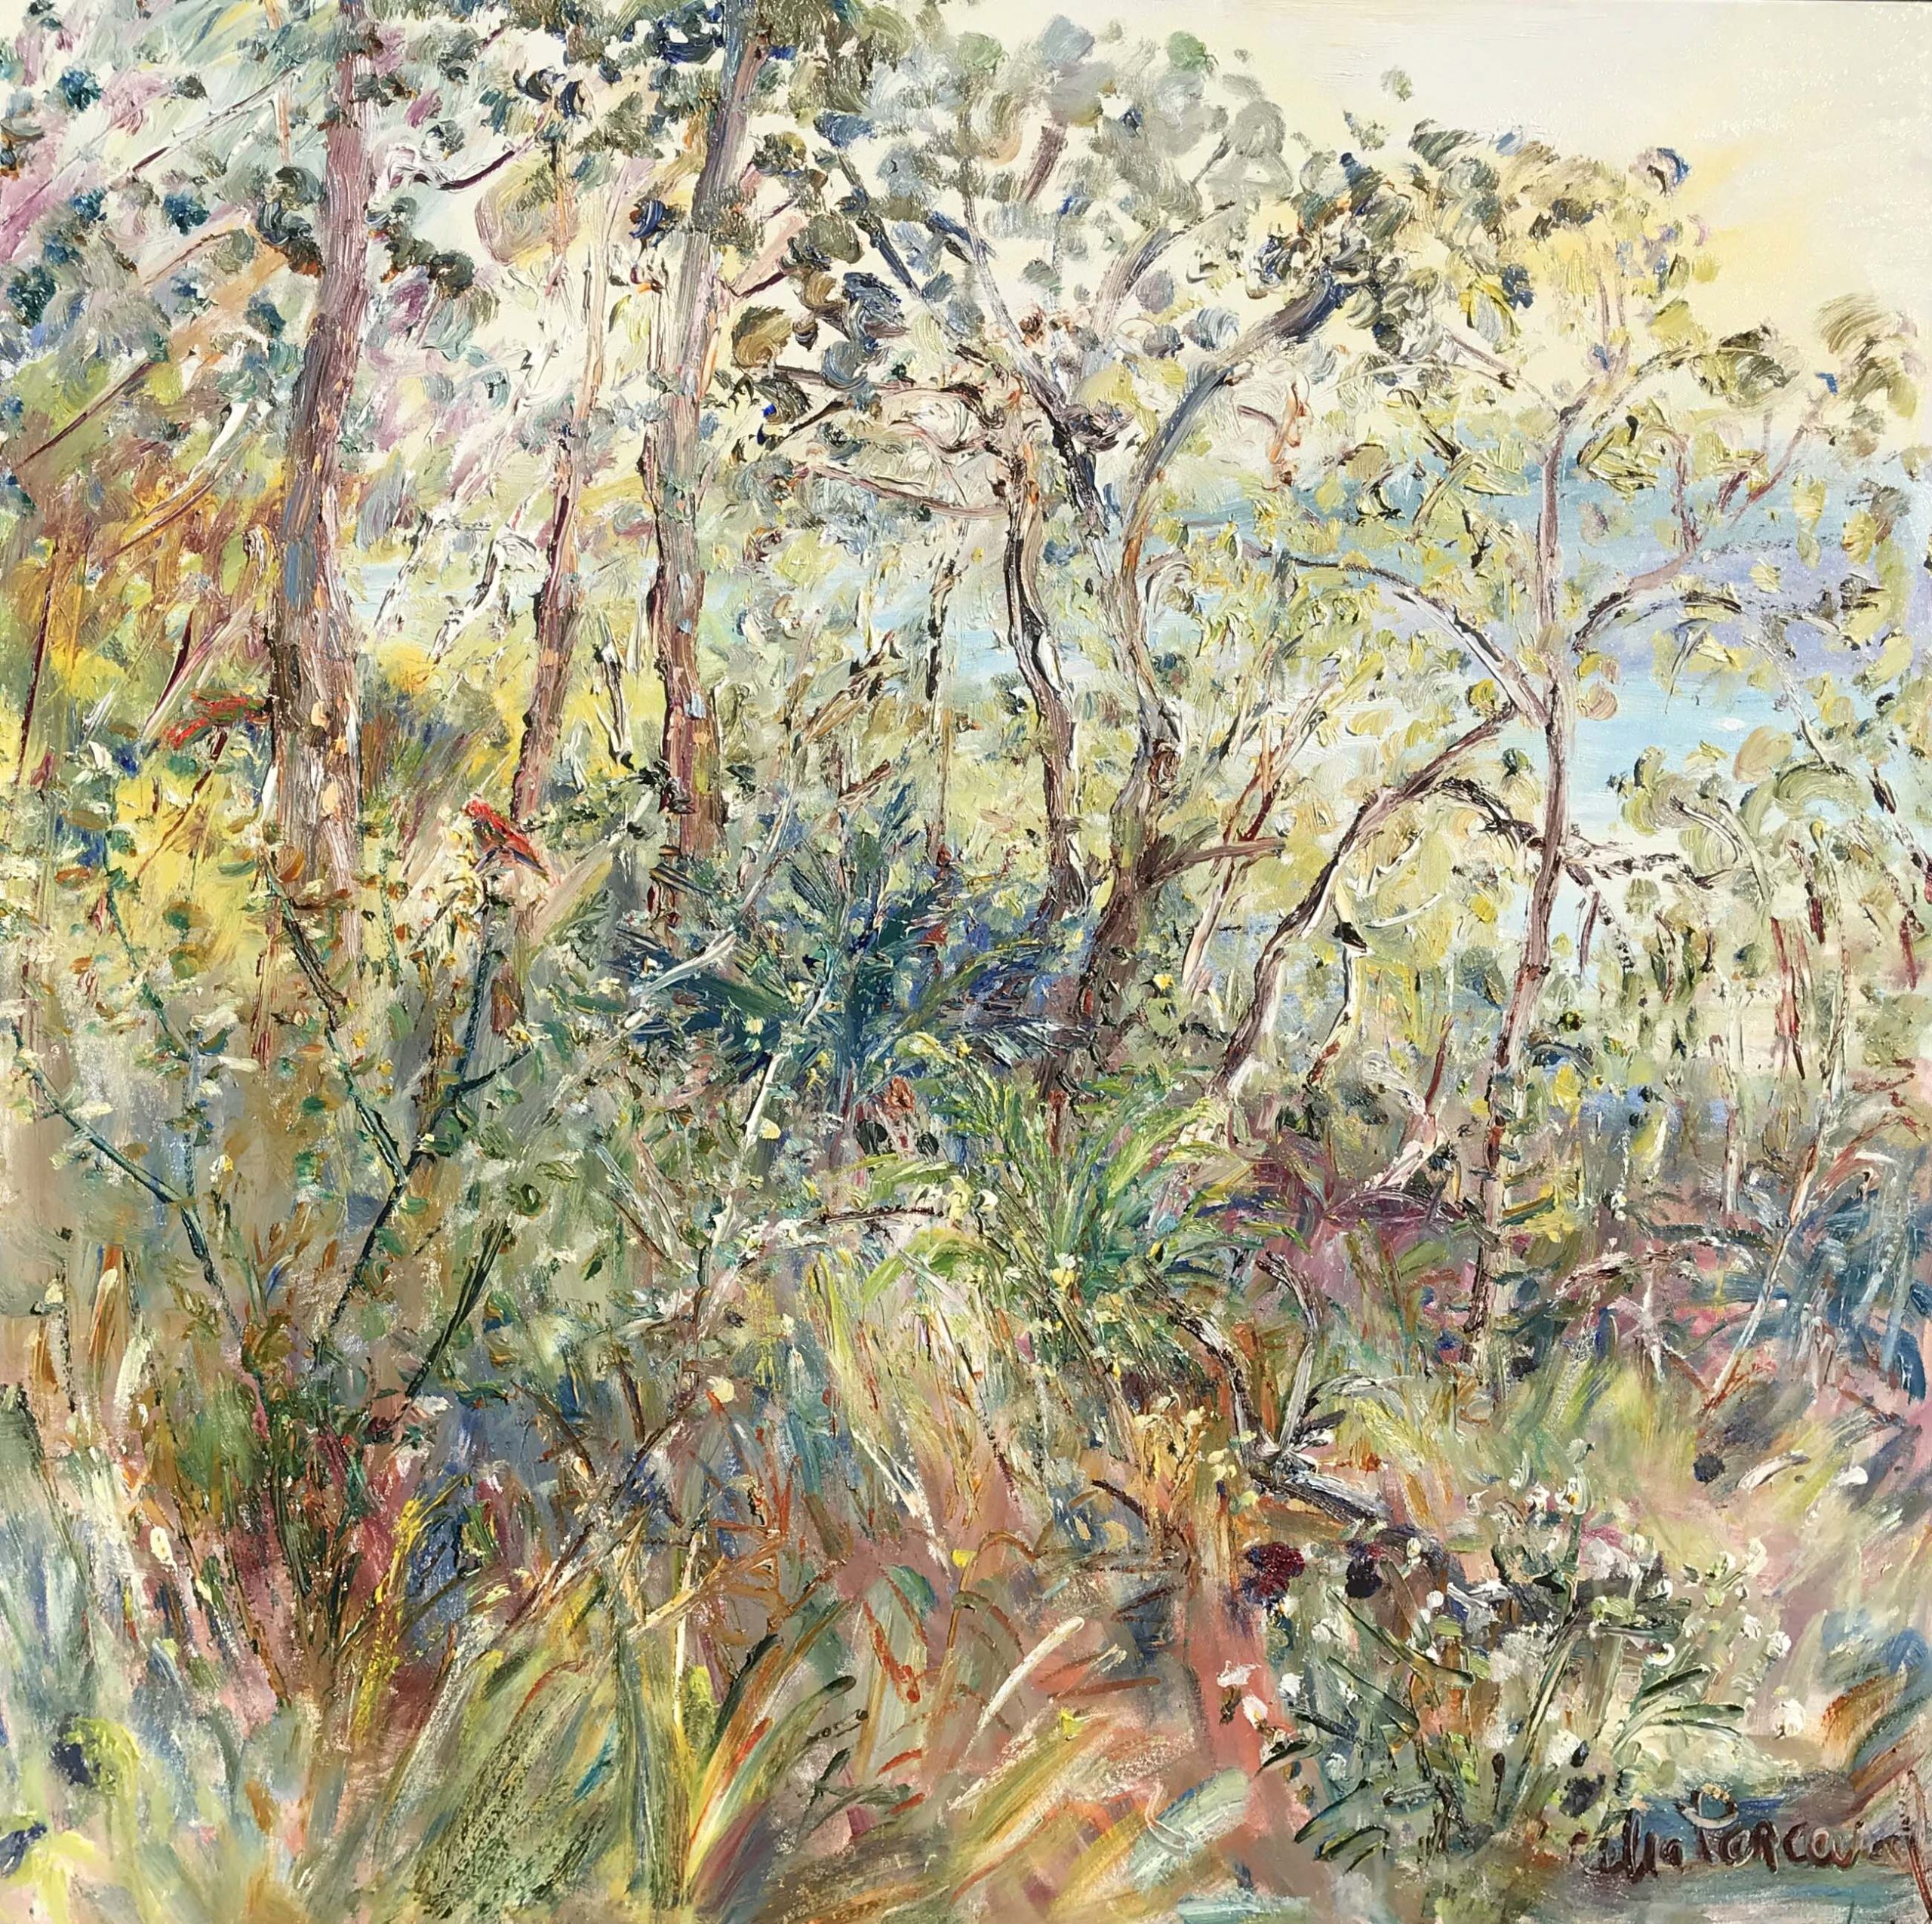 Celia Perceval 'Rosellas in the bush above the Clyde River’ oil on canvas 102 x 102cm $19,500